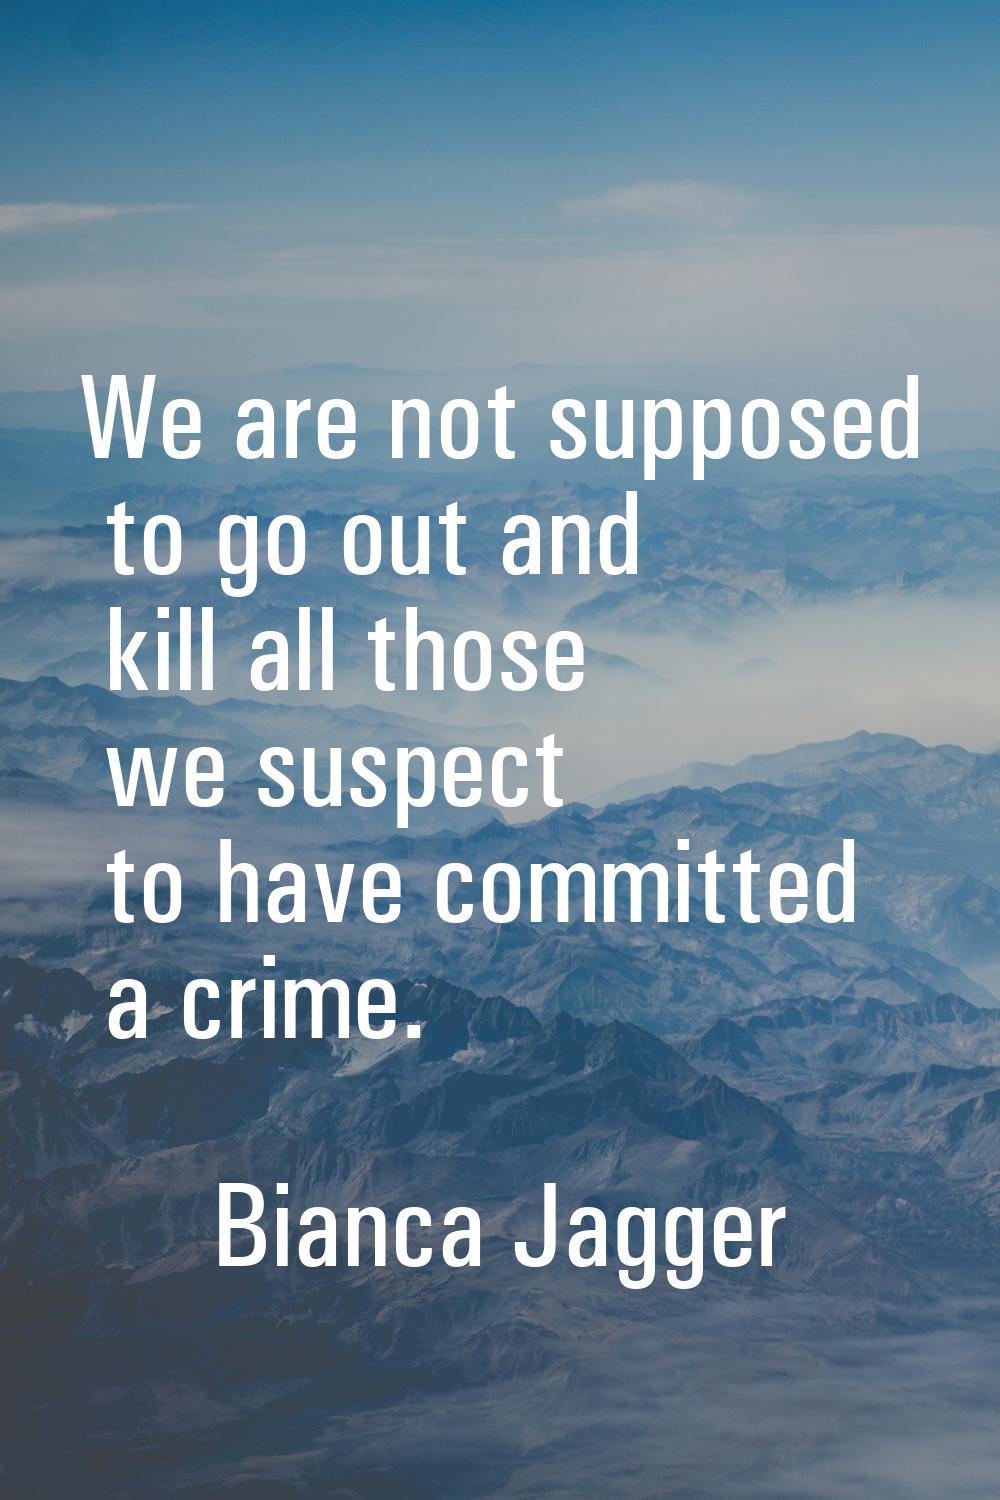 We are not supposed to go out and kill all those we suspect to have committed a crime.